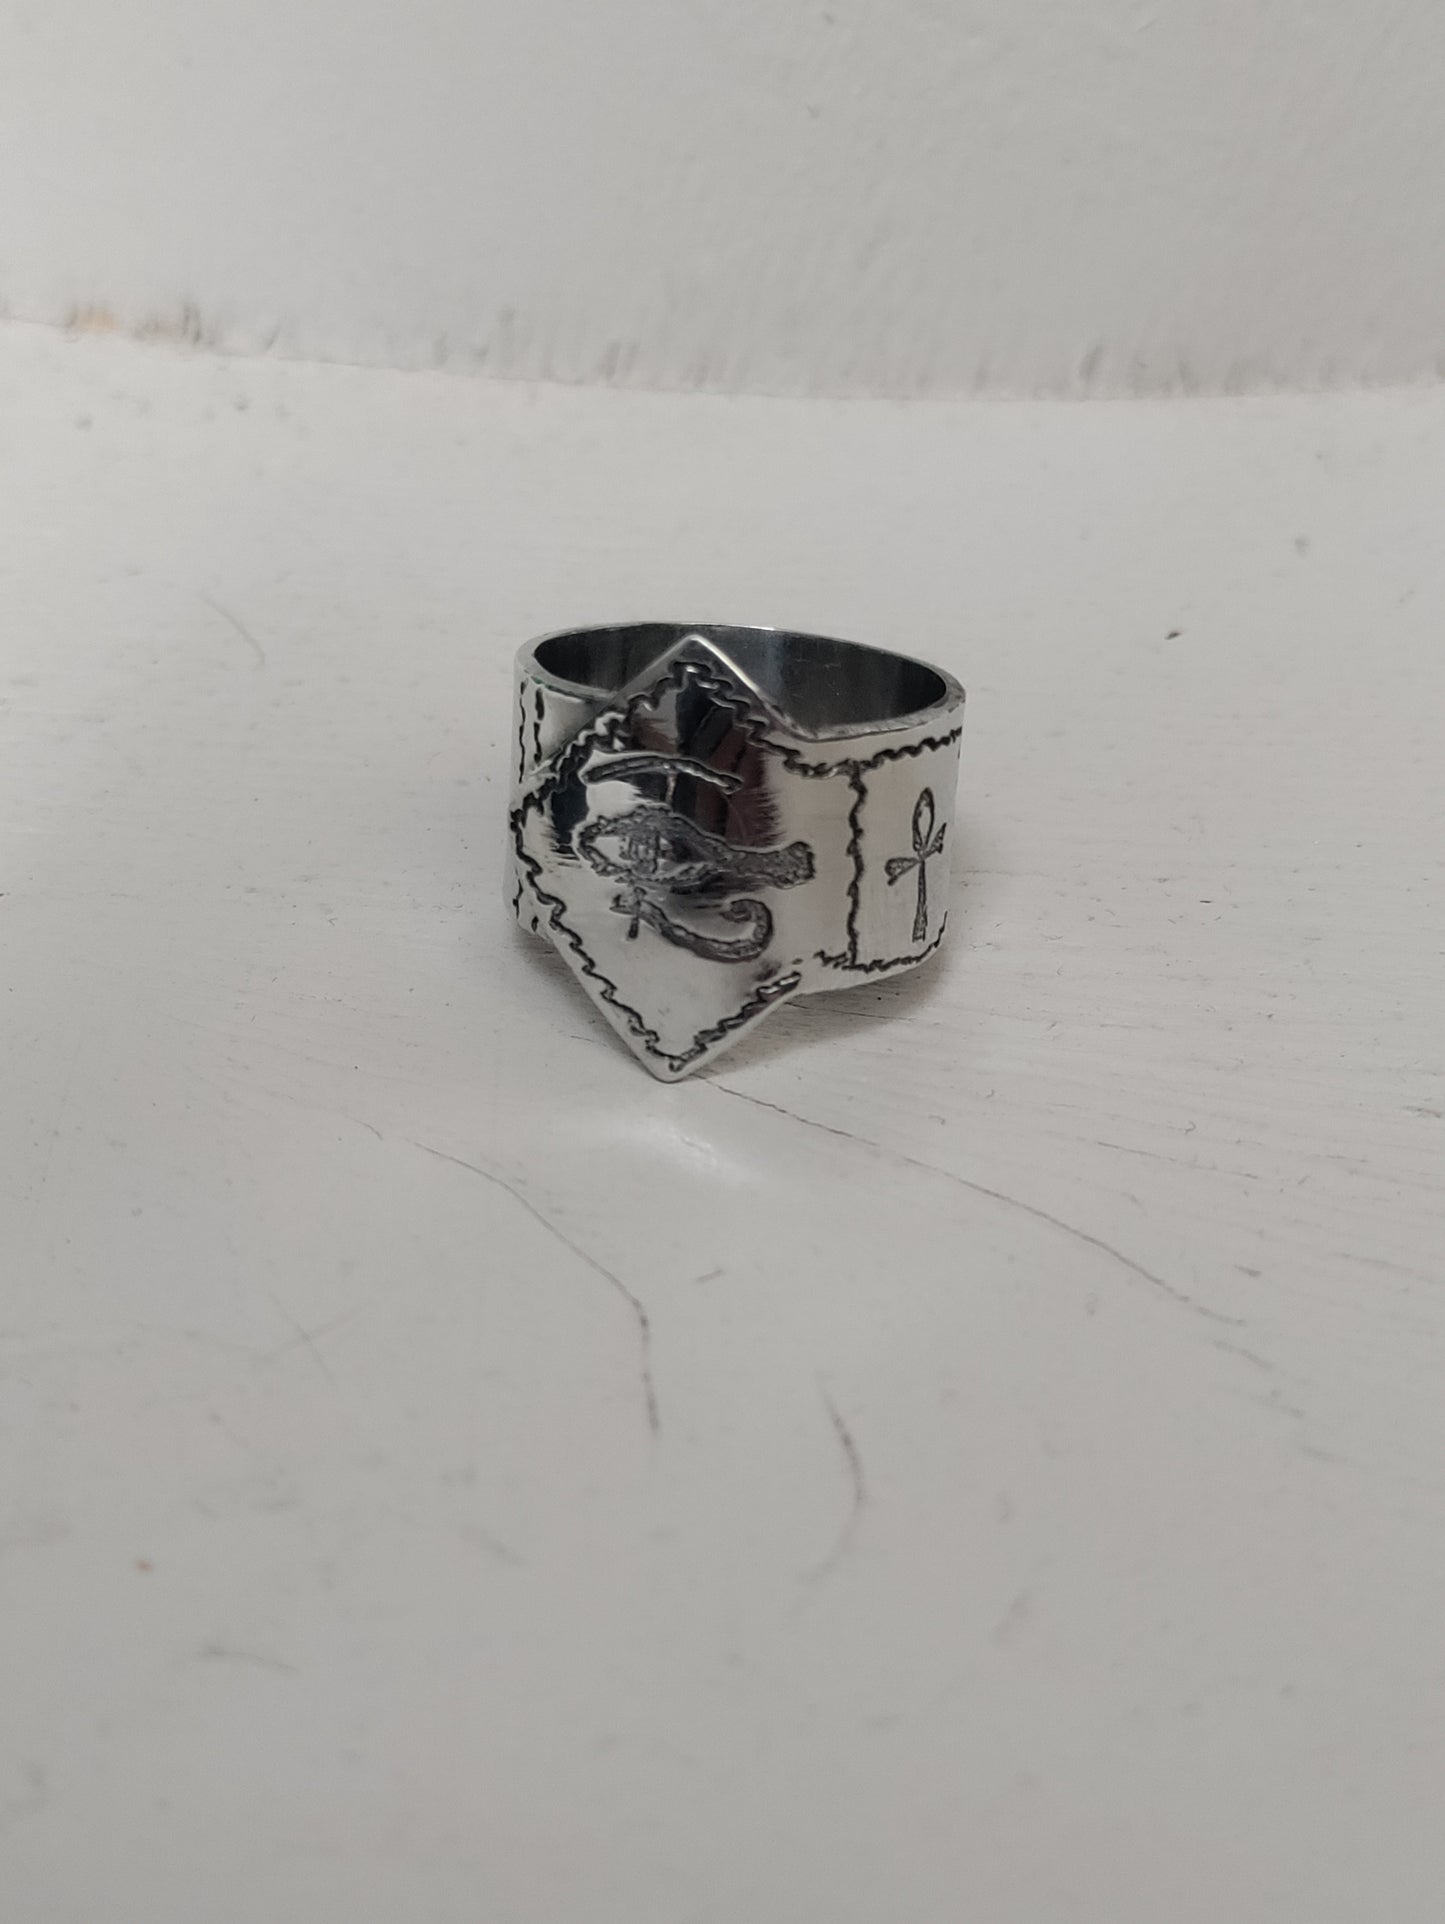 Adjustable silver-color ring with Egyptian symbols LEIA&CO